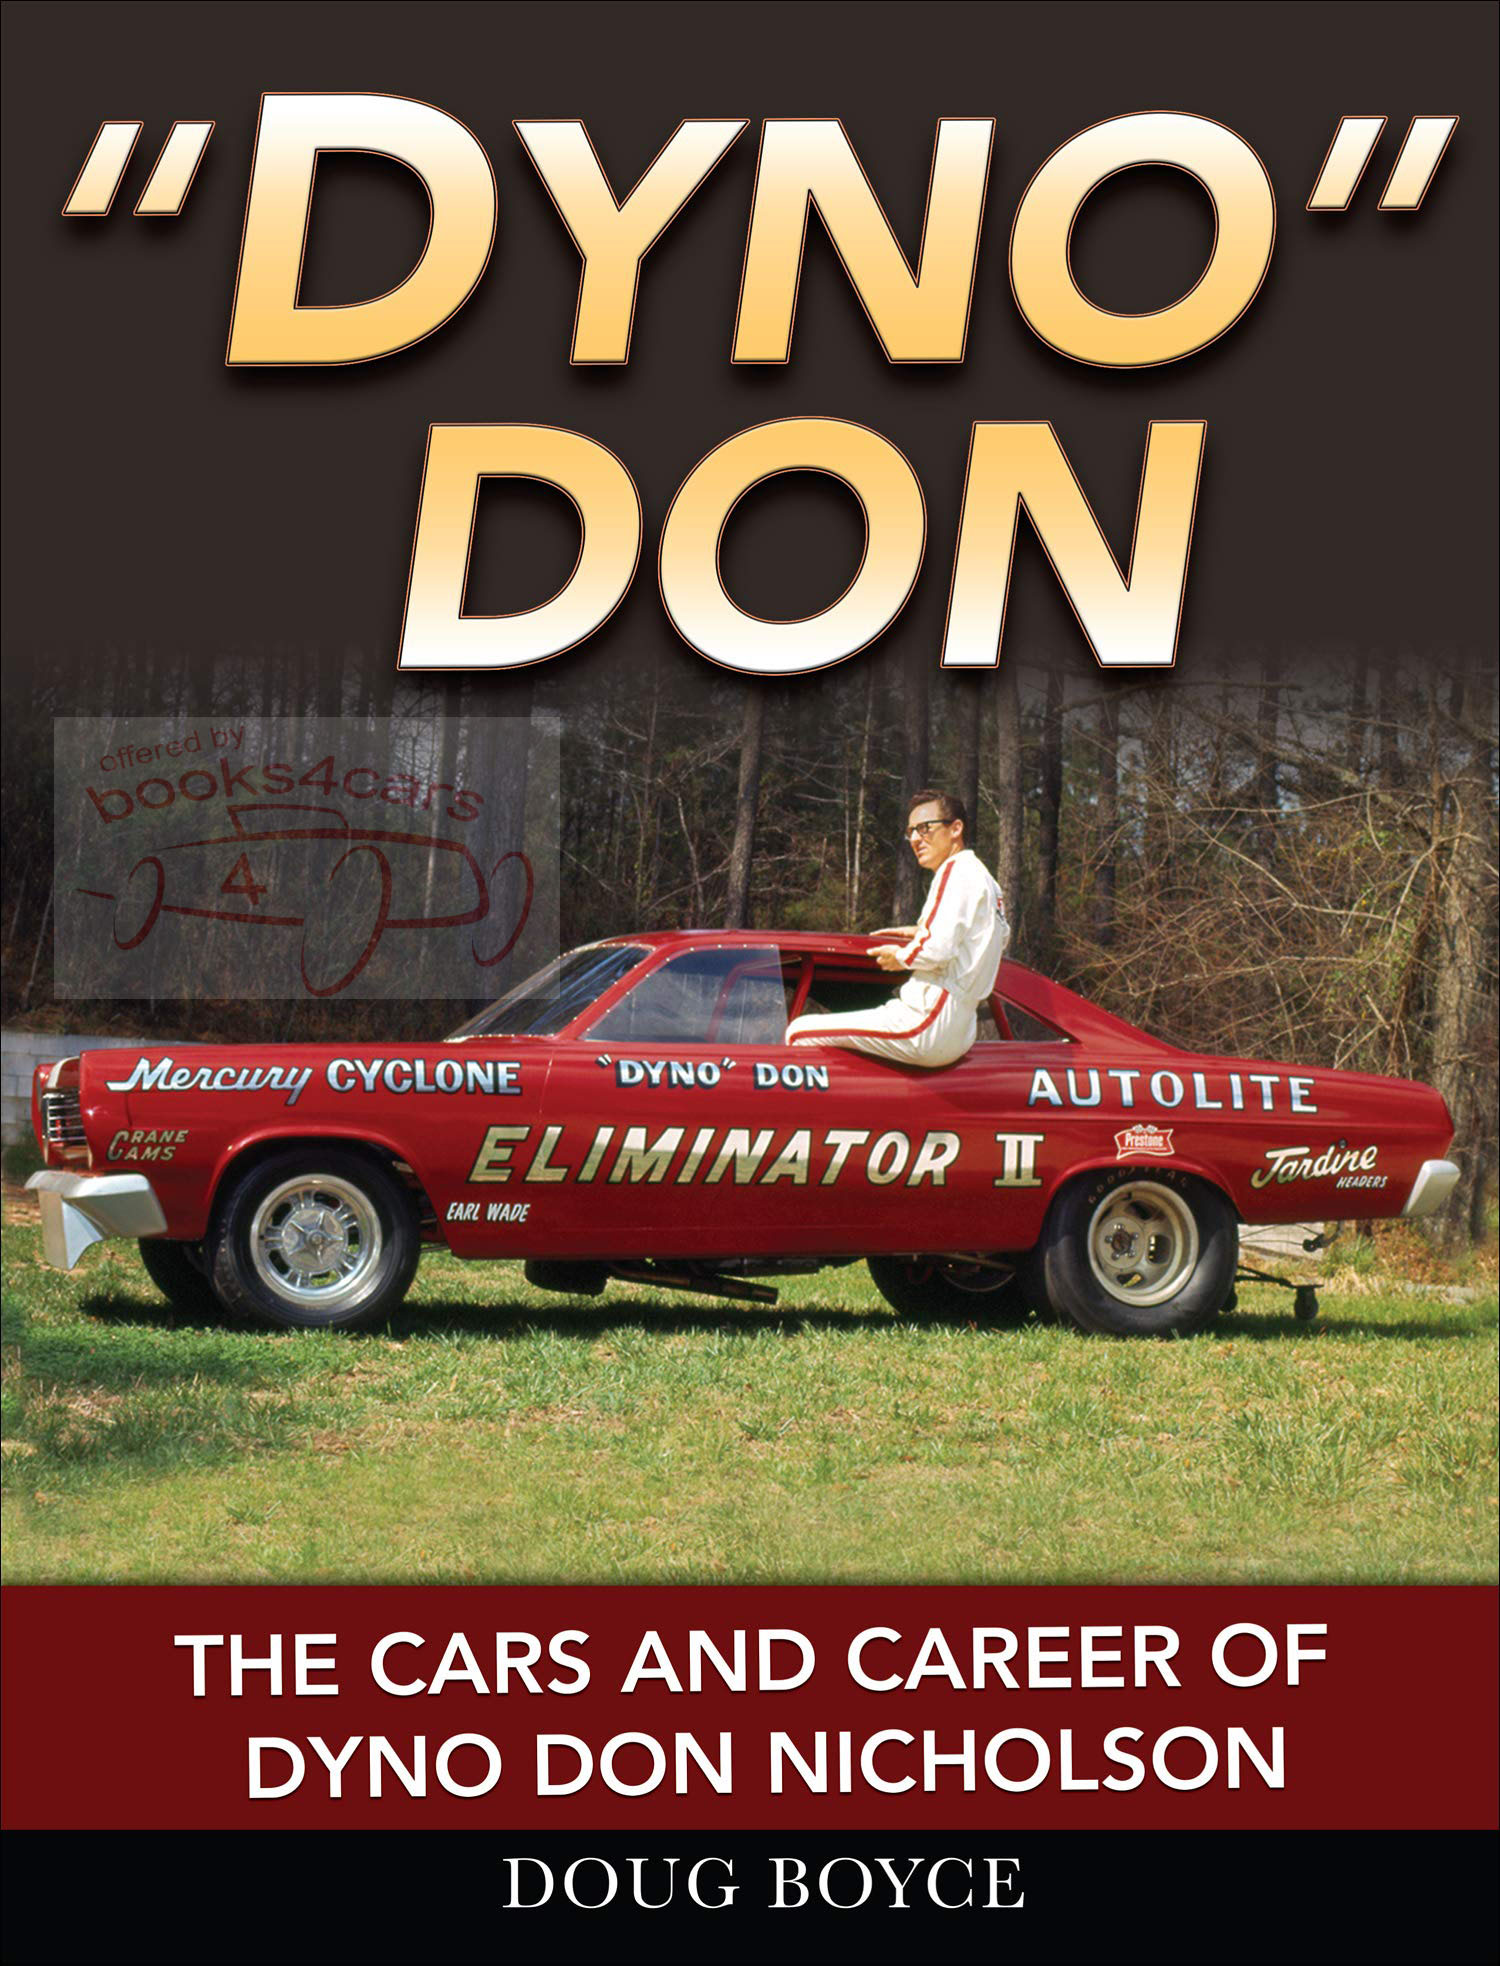 Dyno Don the cars and career of Dyno Don Nicholson 176 pgs by D. Boyce